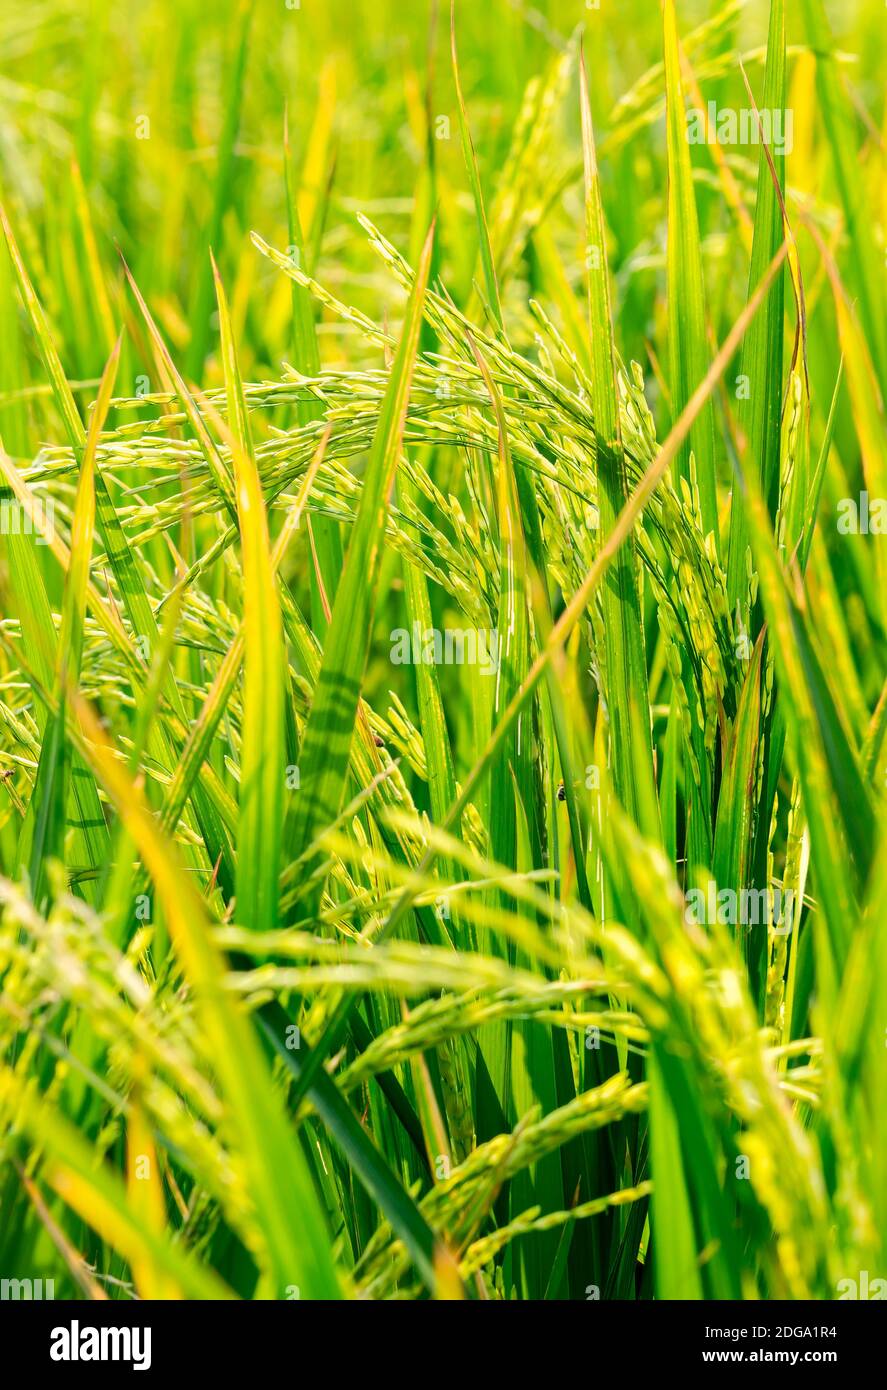 Vertical image of beautiful rice field, Close up to one ear of rice or ear of paddy, selected focus. Blurred foreground and background. Fresh of natur Stock Photo